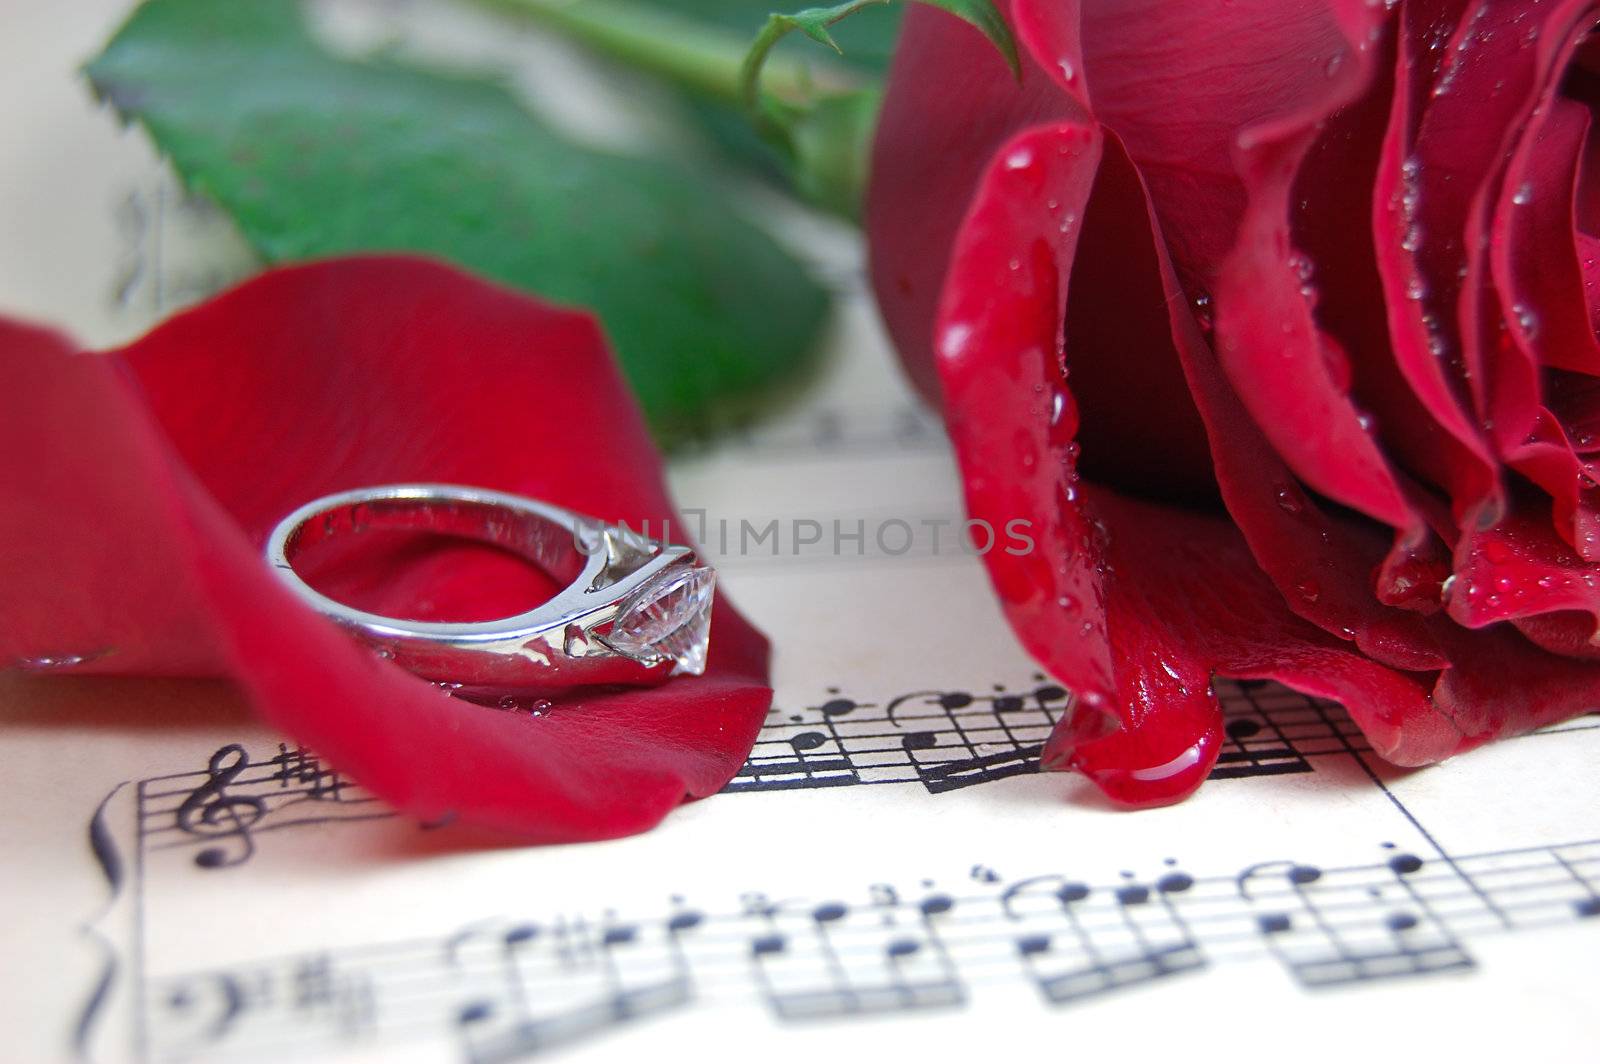 Red rose and its petals, ring on music sheet